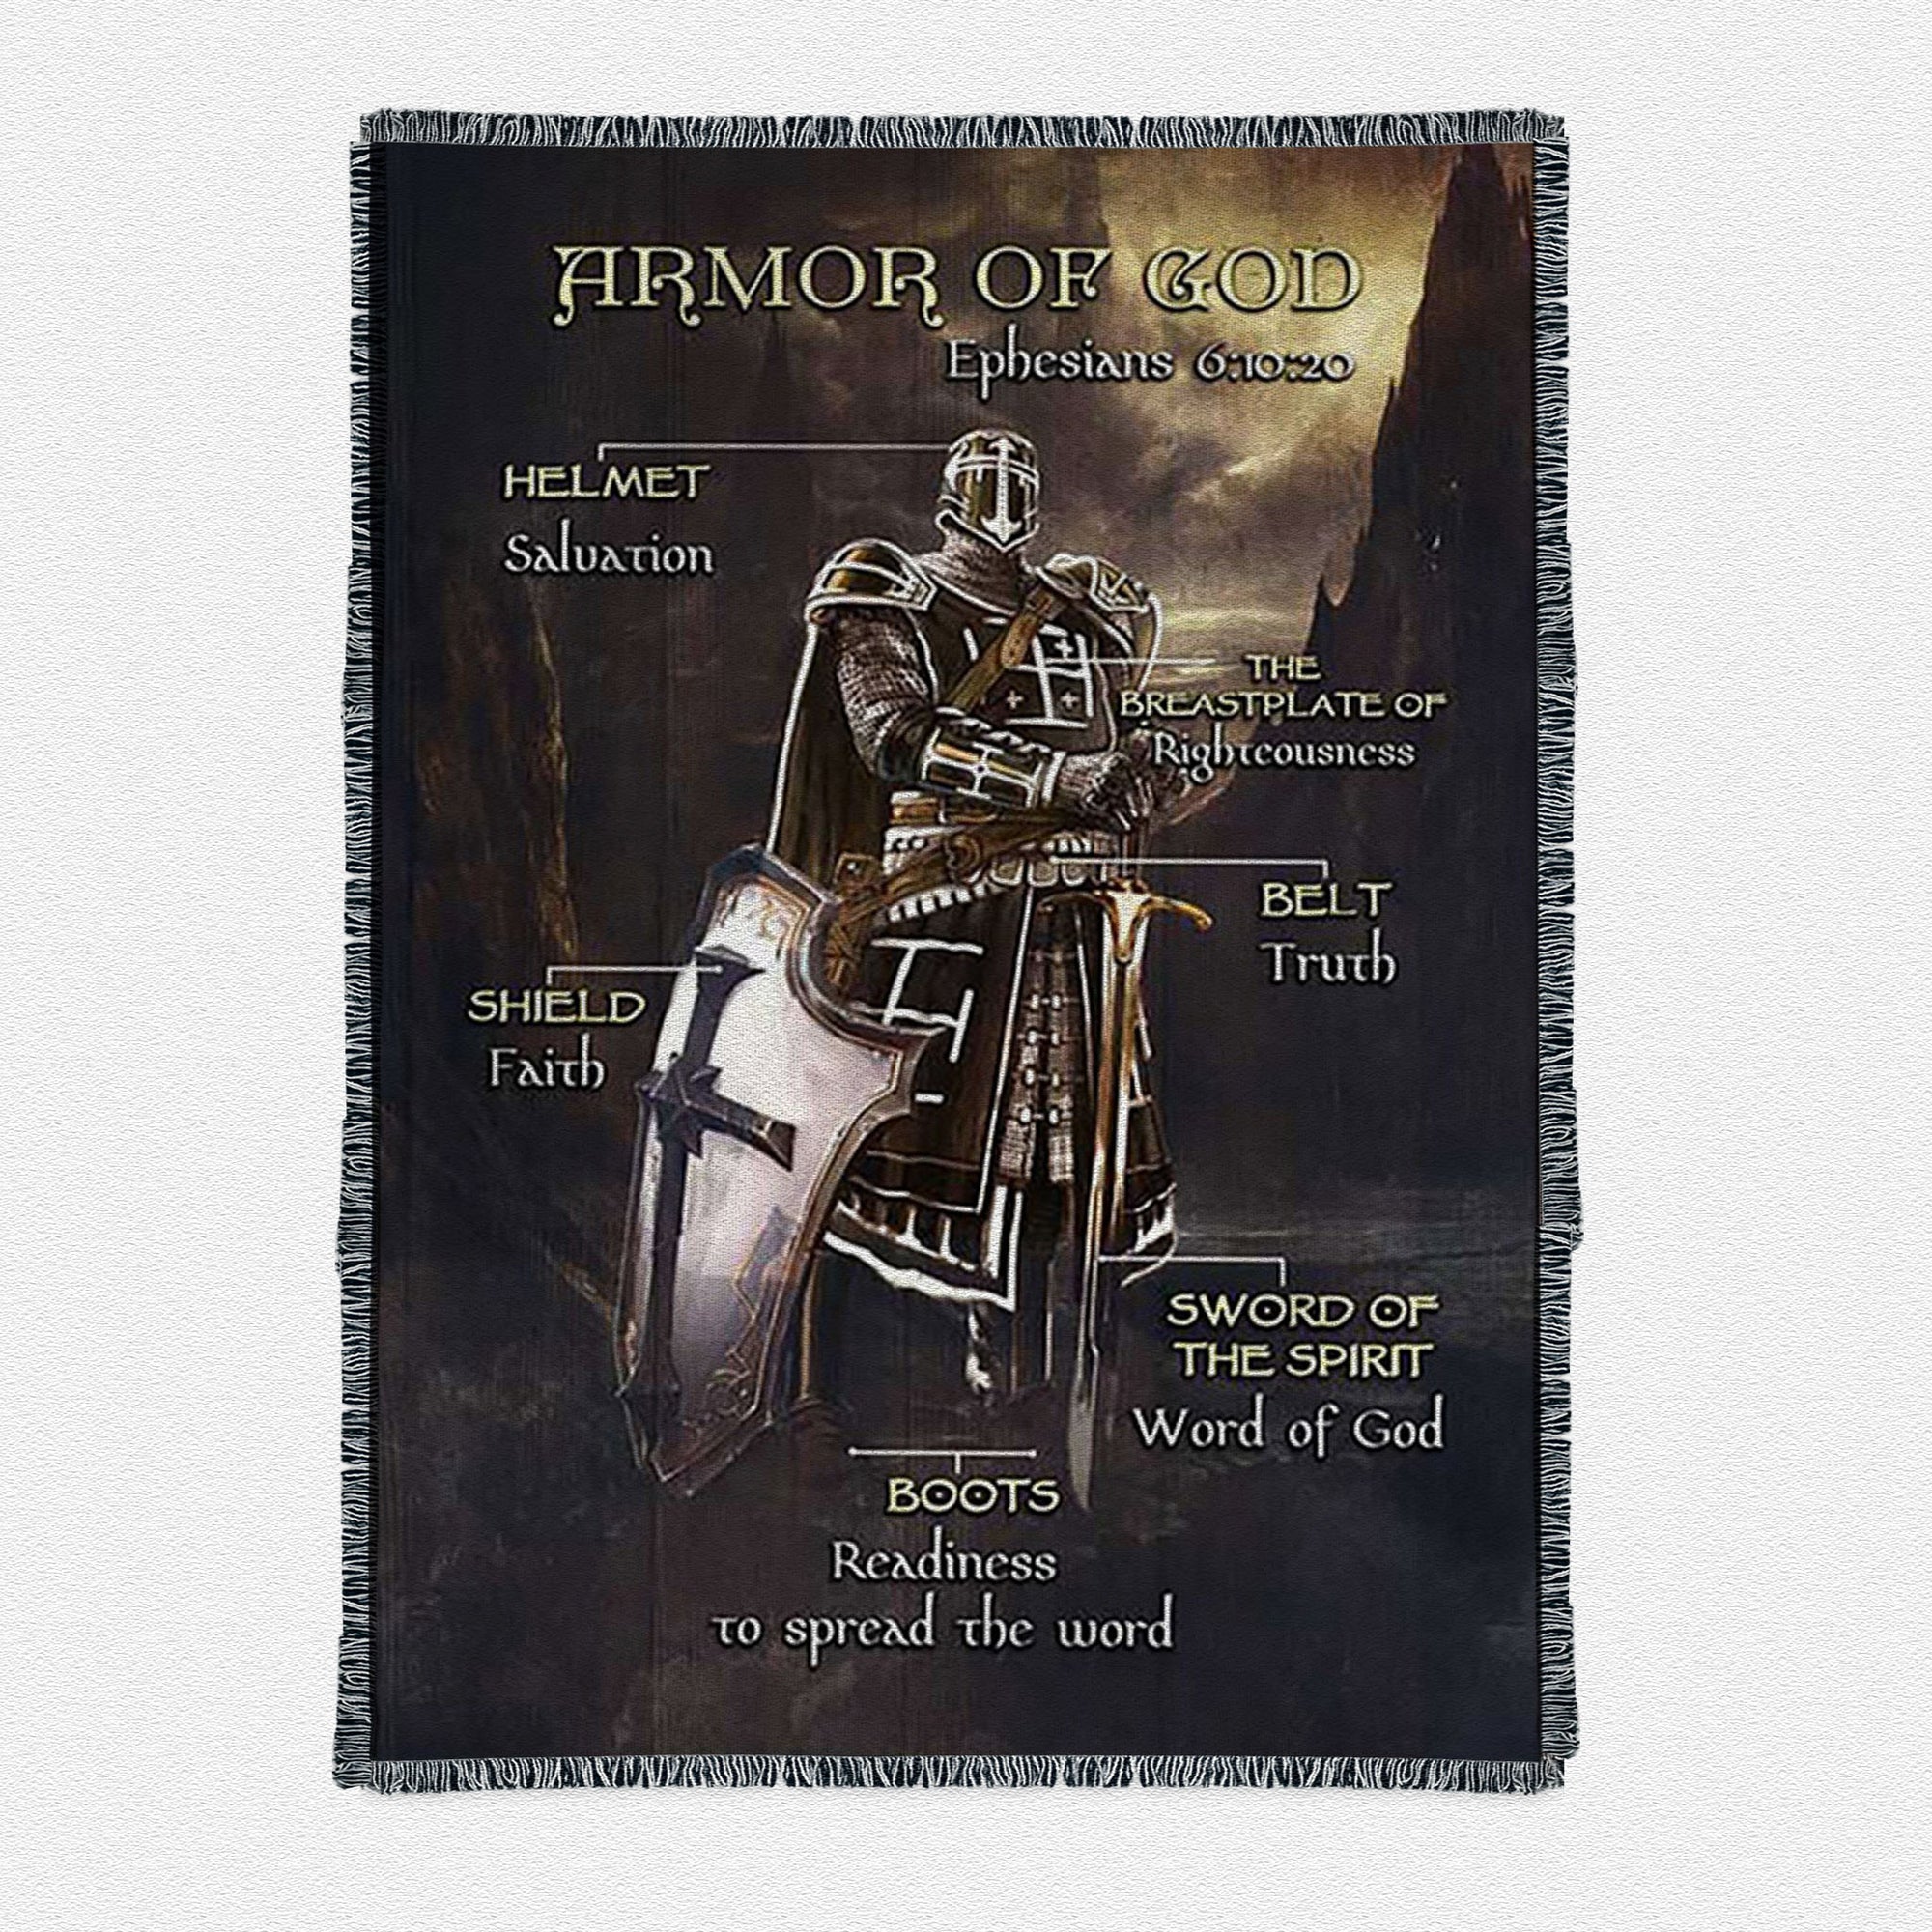 Armor Of God The Knight Of God Warrior Painting - Under The Command Of God Woven Throw Boho Blanket - Christian Woven Throw Blanket Prints